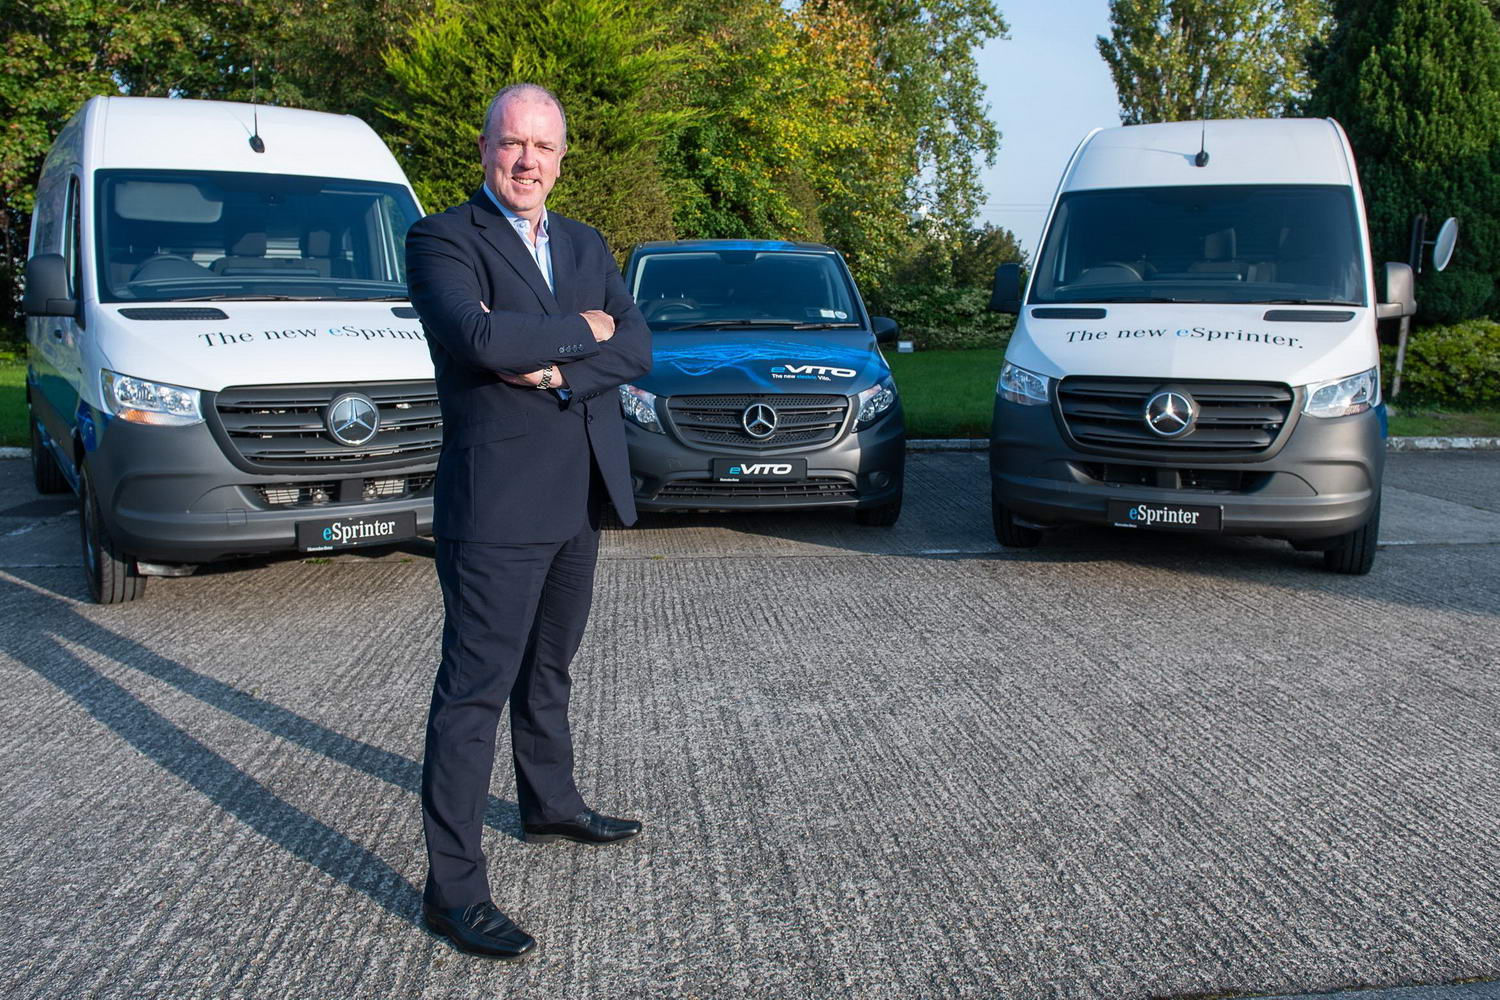 Mercedes-Benz commercial vehicles sales manager, Fergus Conheady, with the Mercedes vans.